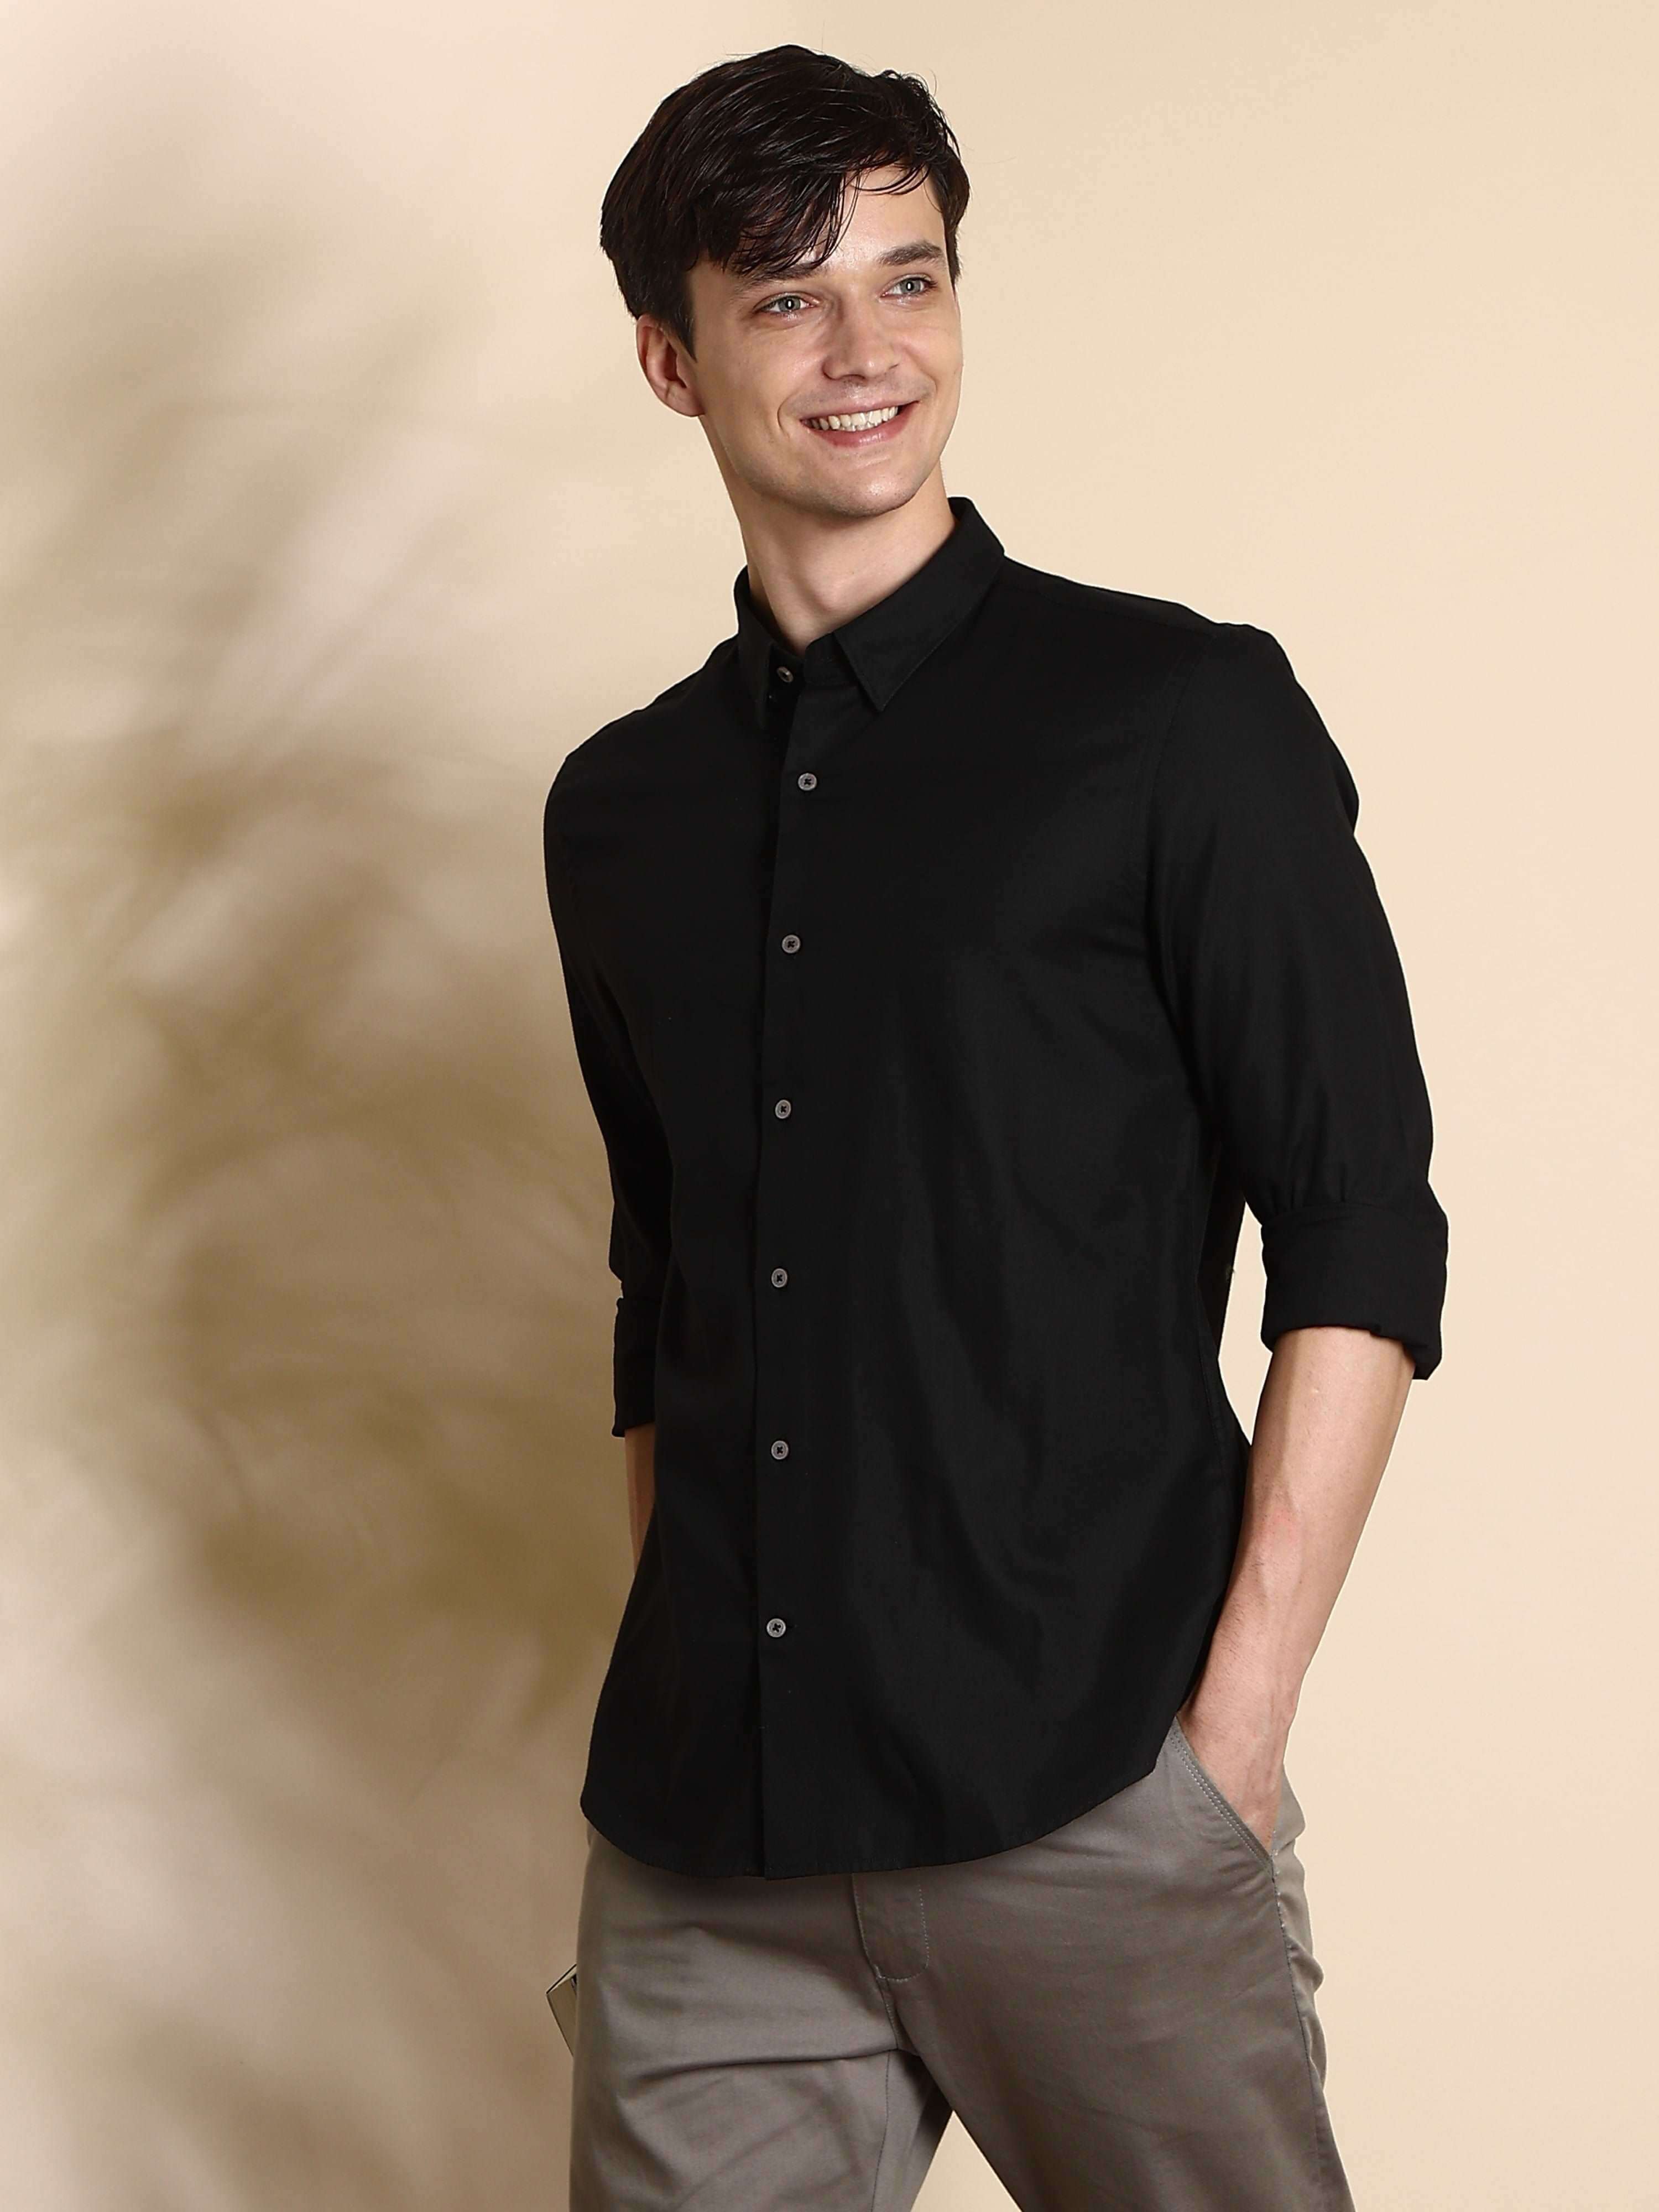 Black Solid Casual Full Sleeve Shirt